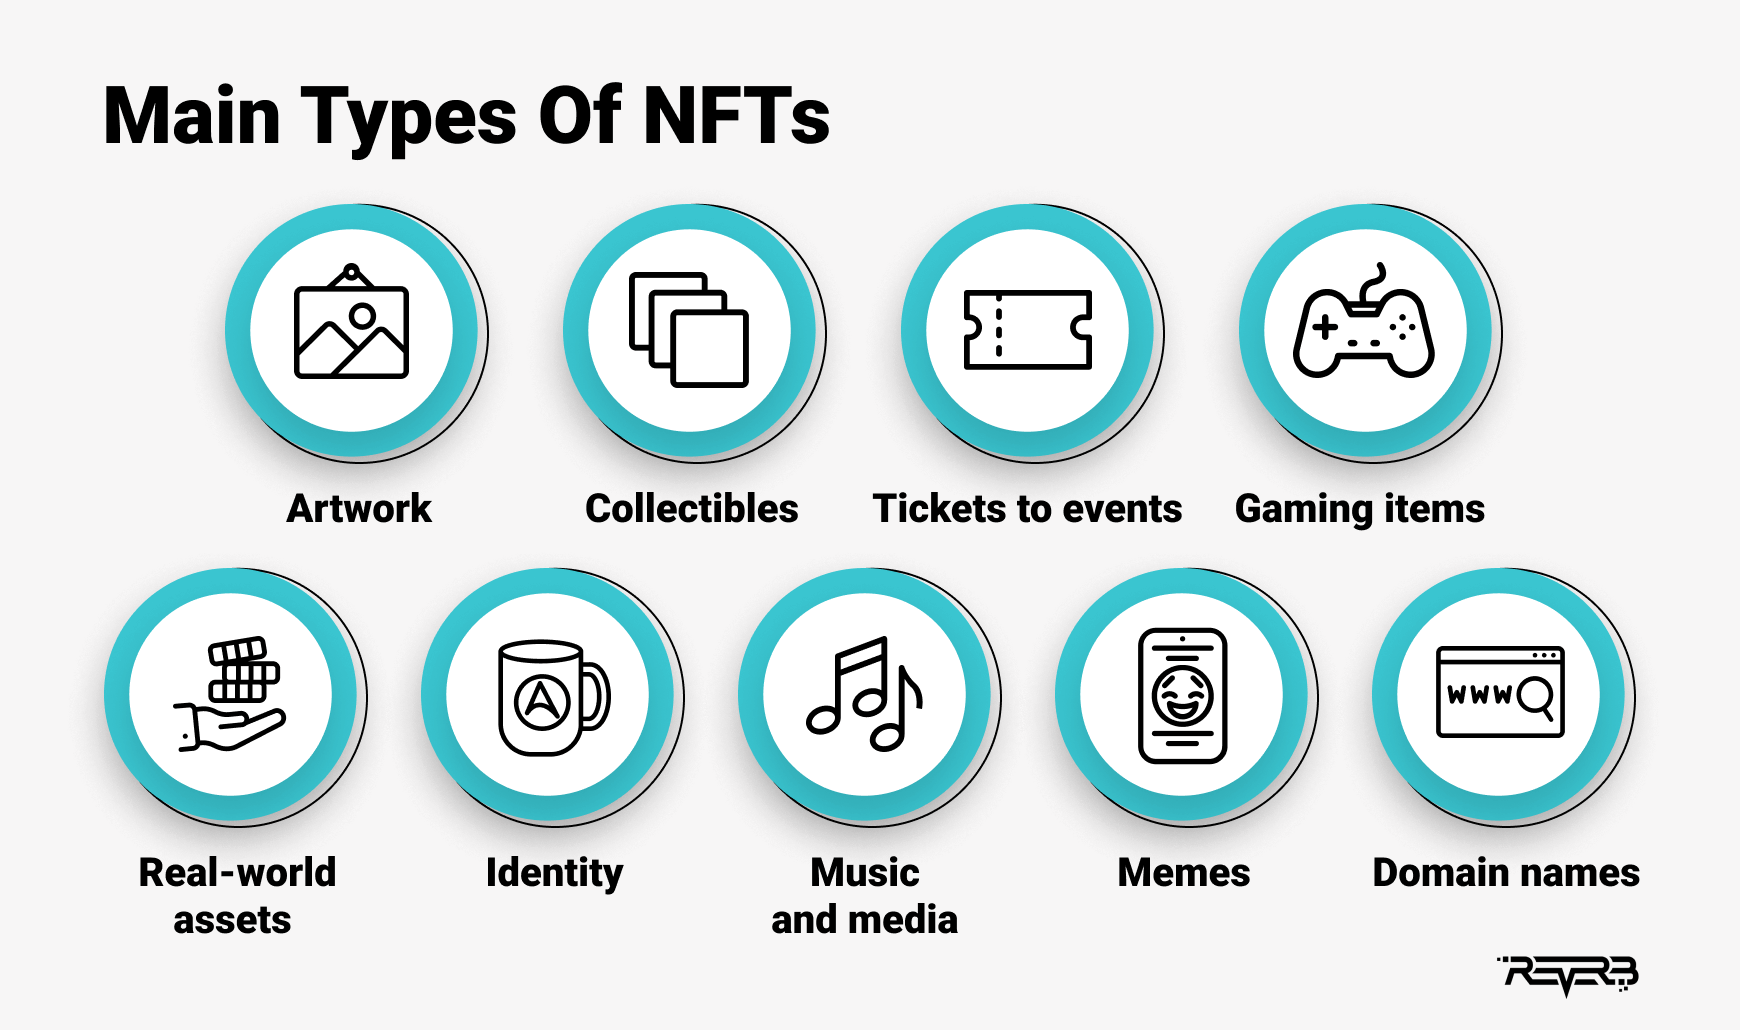 Main Types of NFTs